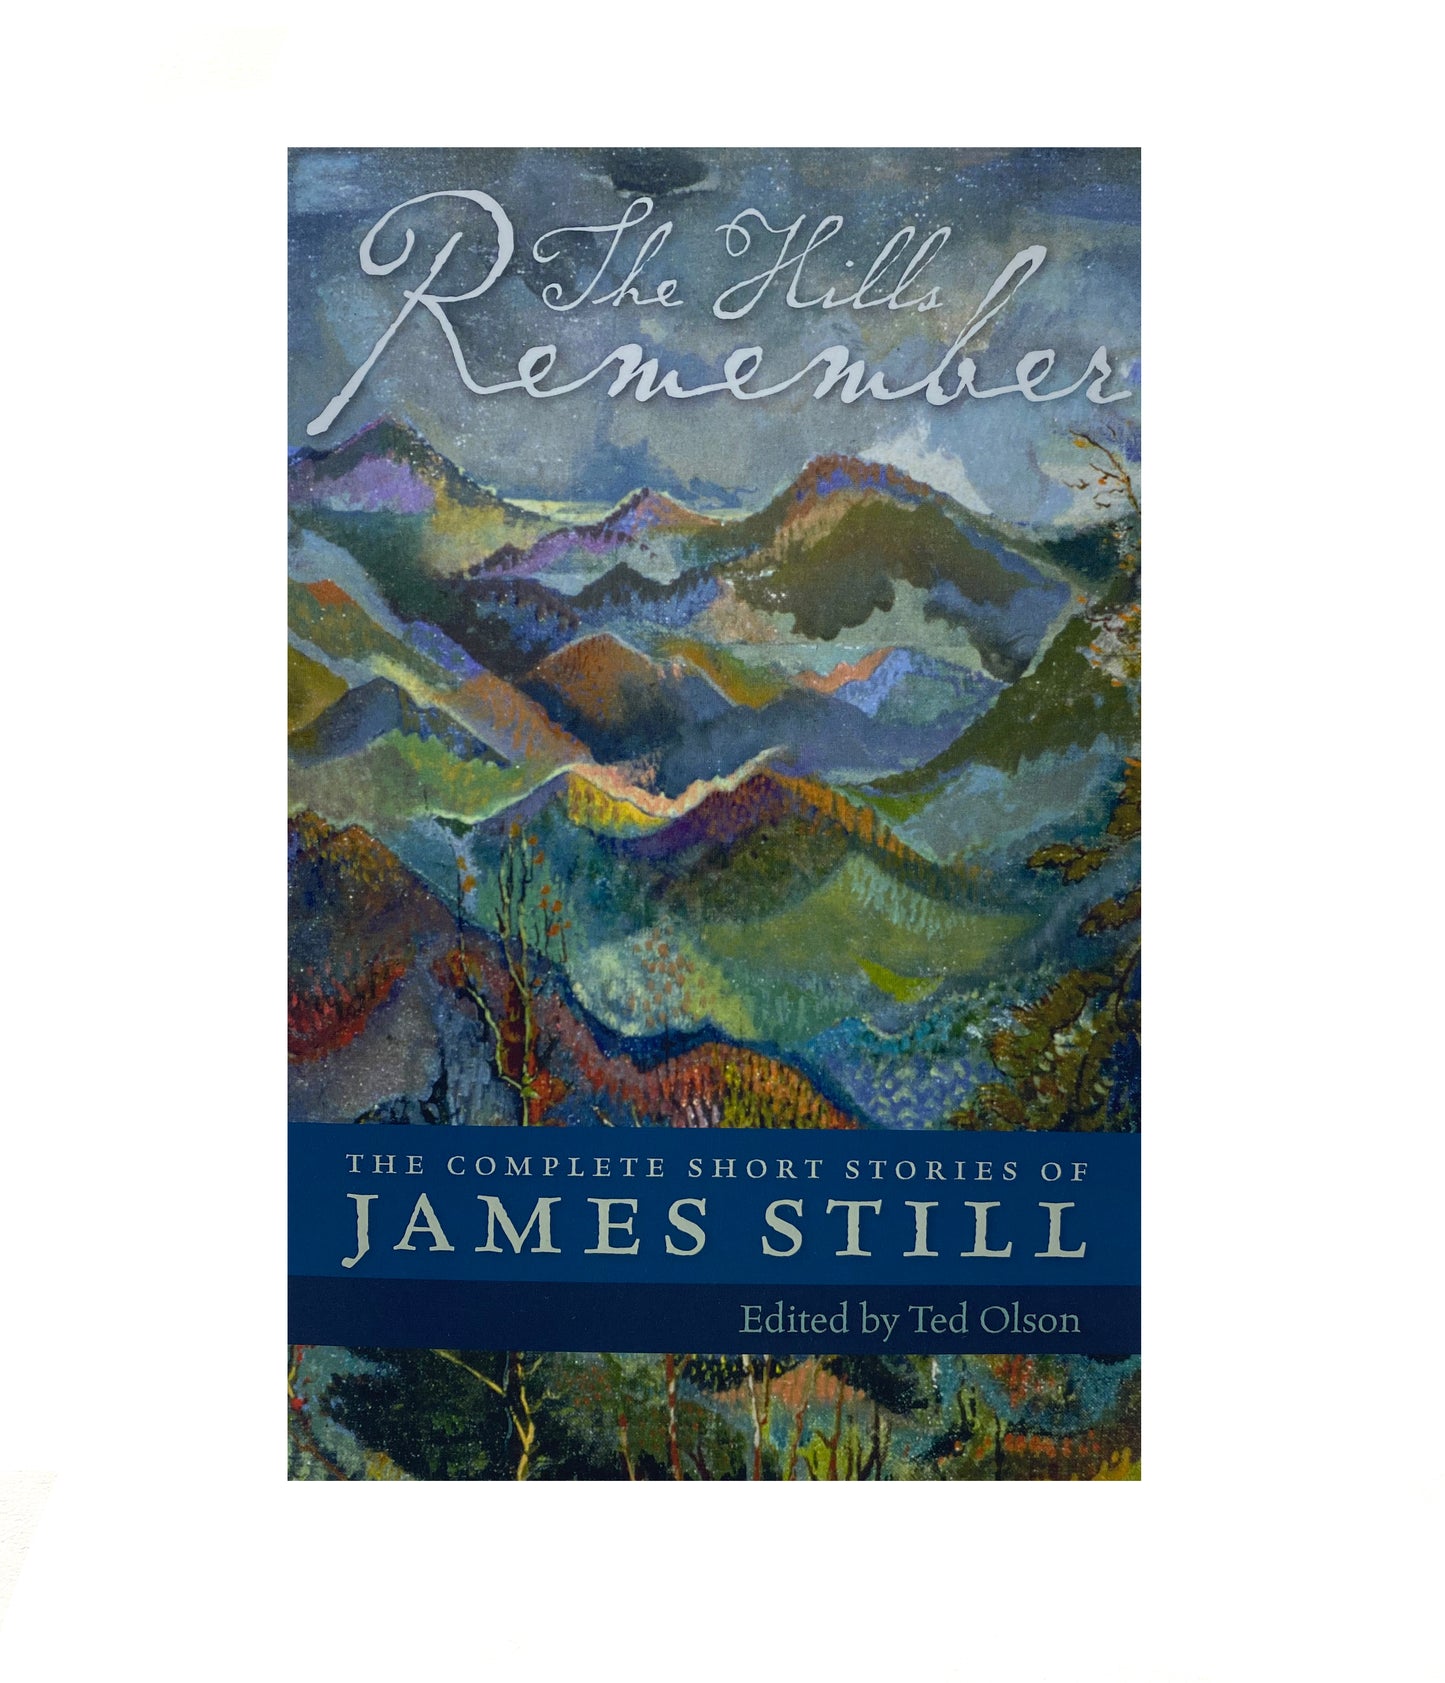 The Hills Remember: The Complete Short Stories of James Still